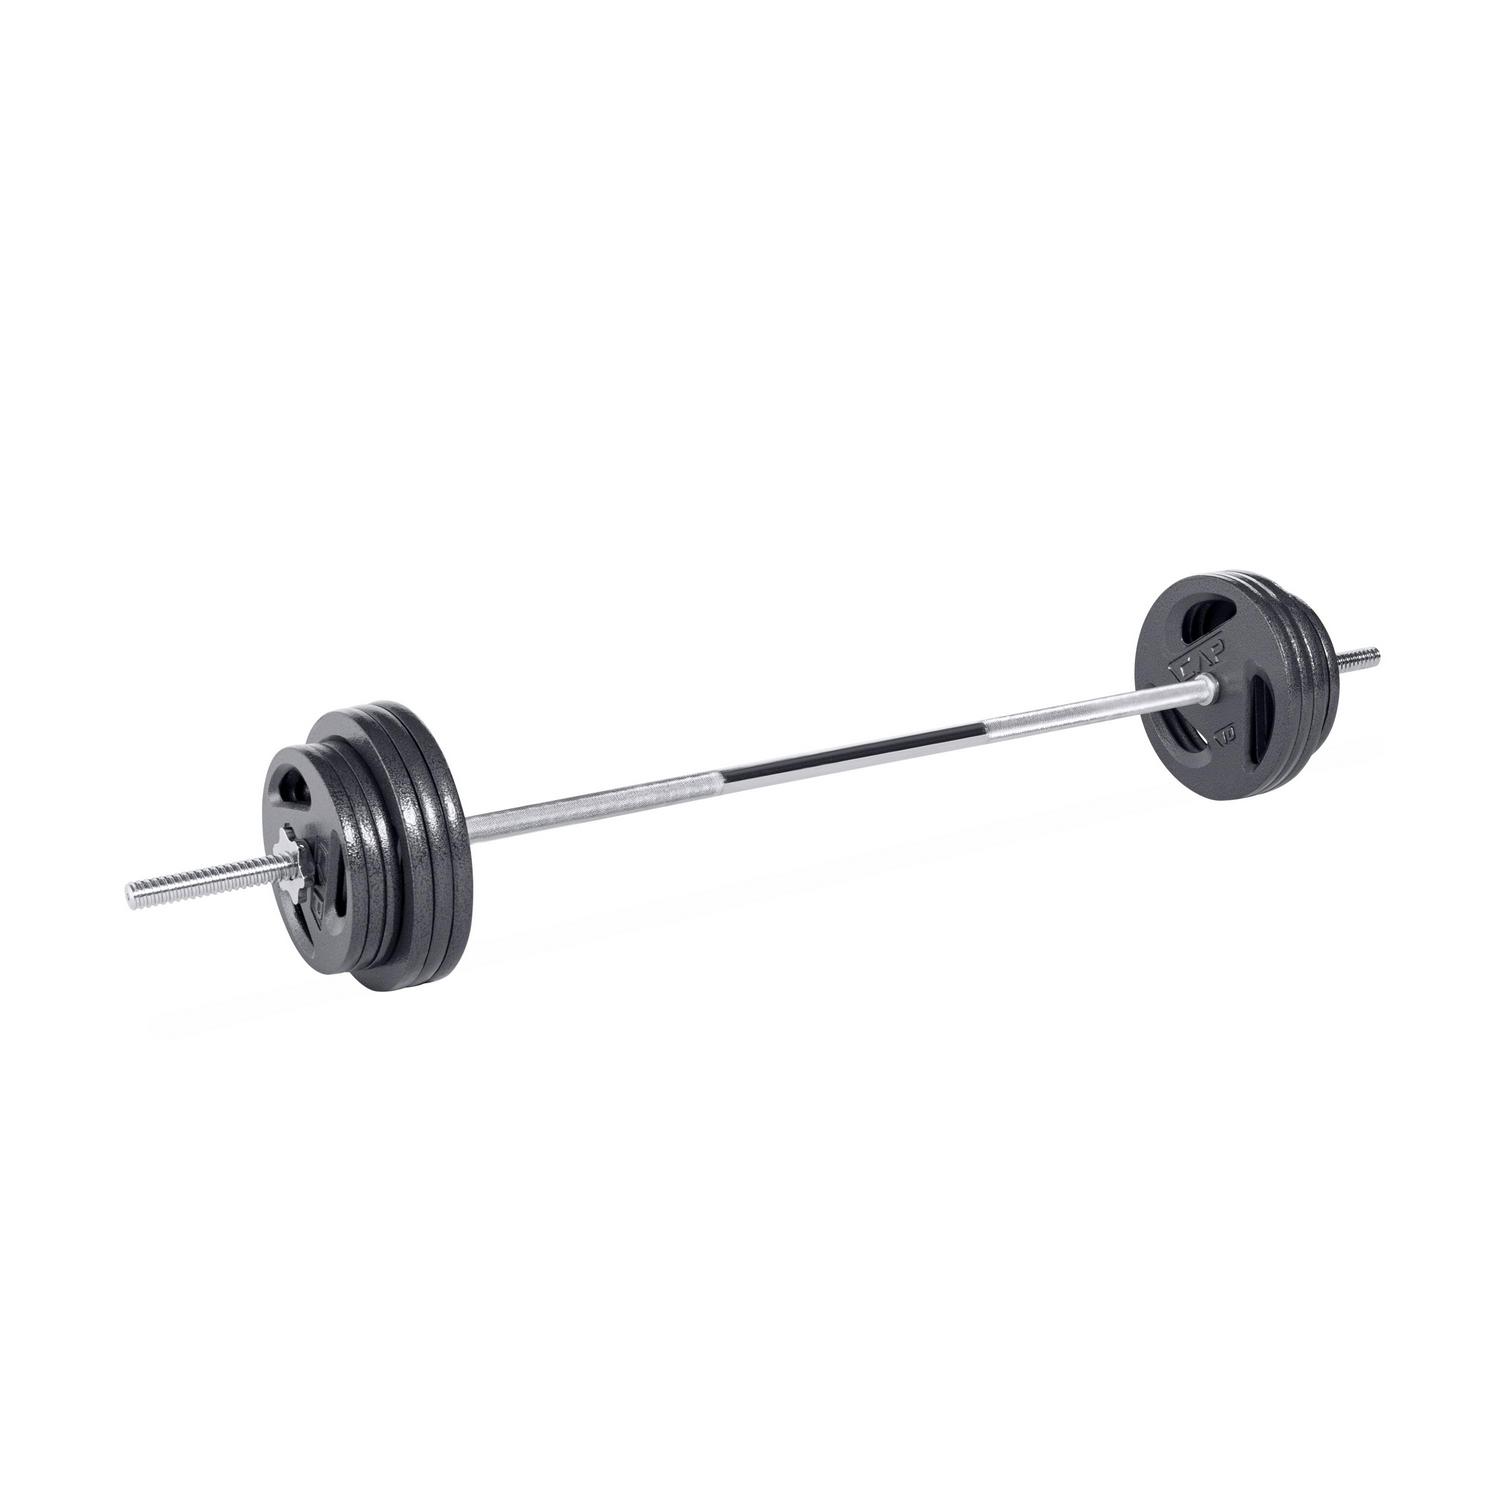 6 ft Barbell Straight Standard Weight Bar with Threaded Ends 